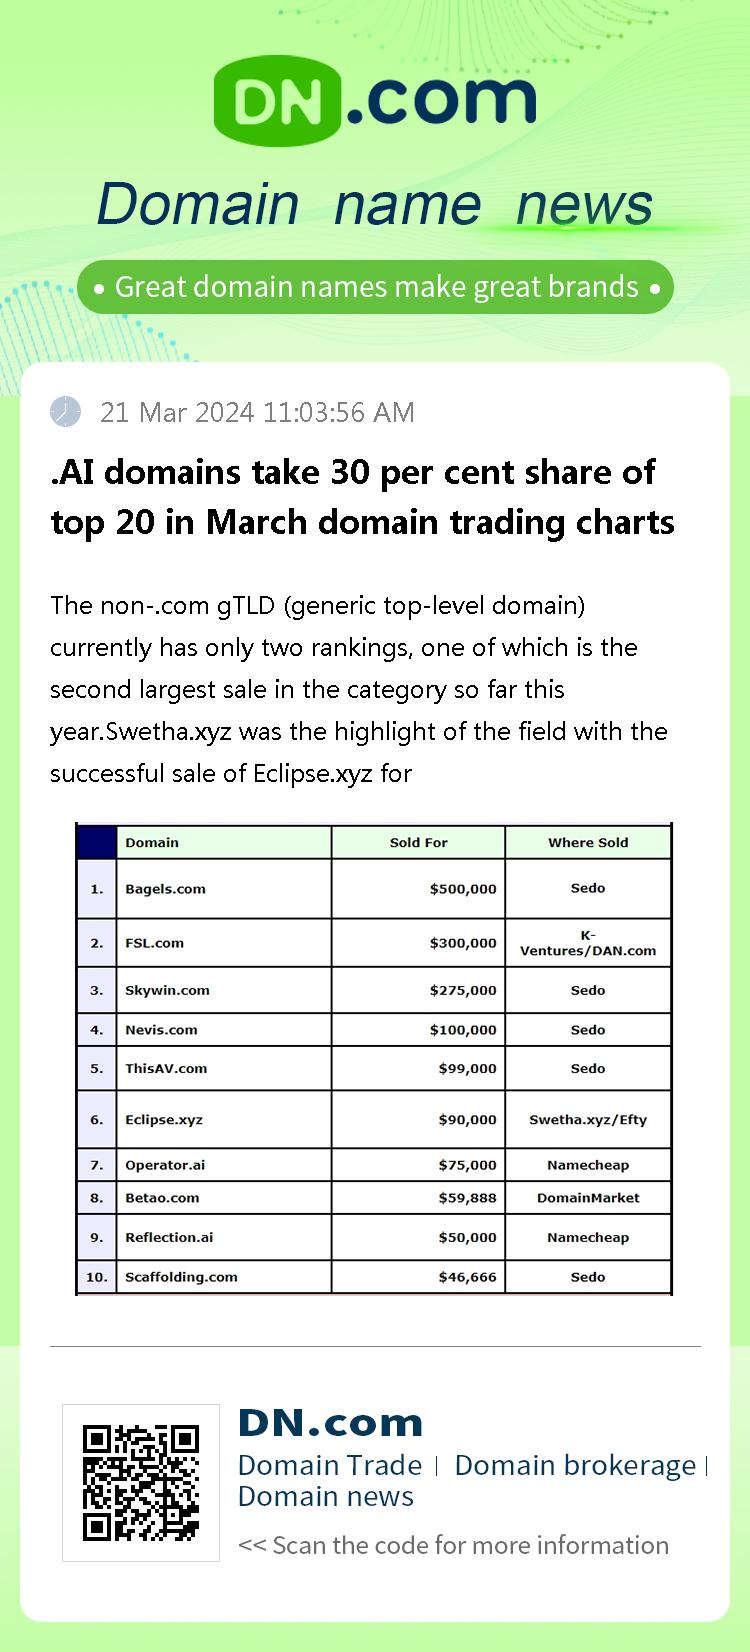 .AI domains take 30 per cent share of top 20 in March domain trading charts